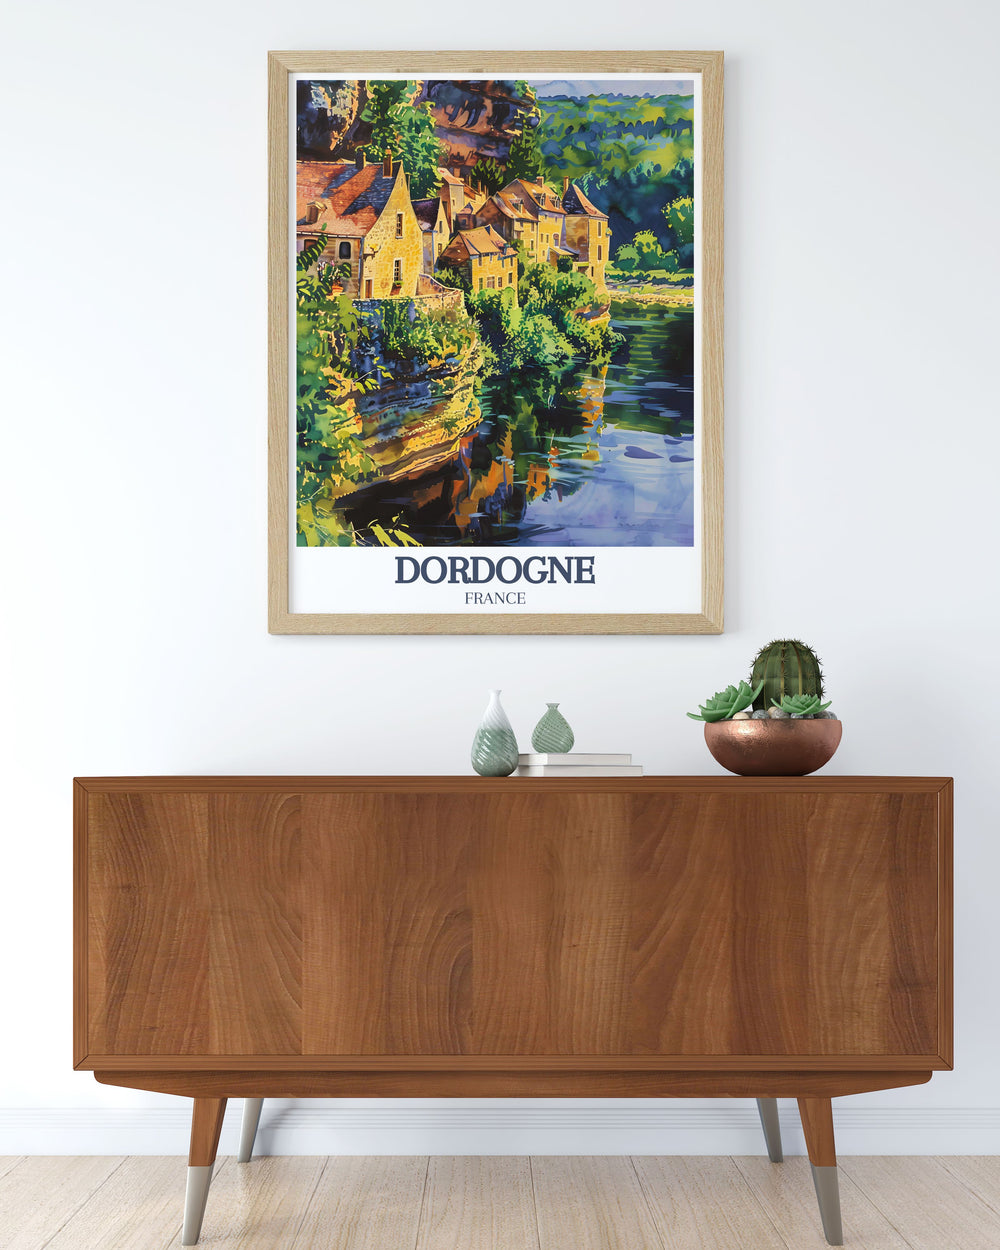 Stunning Dordogne River and La Roque Gageac travel print showcasing the serene beauty and historical significance of this enchanting region perfect for France art lovers